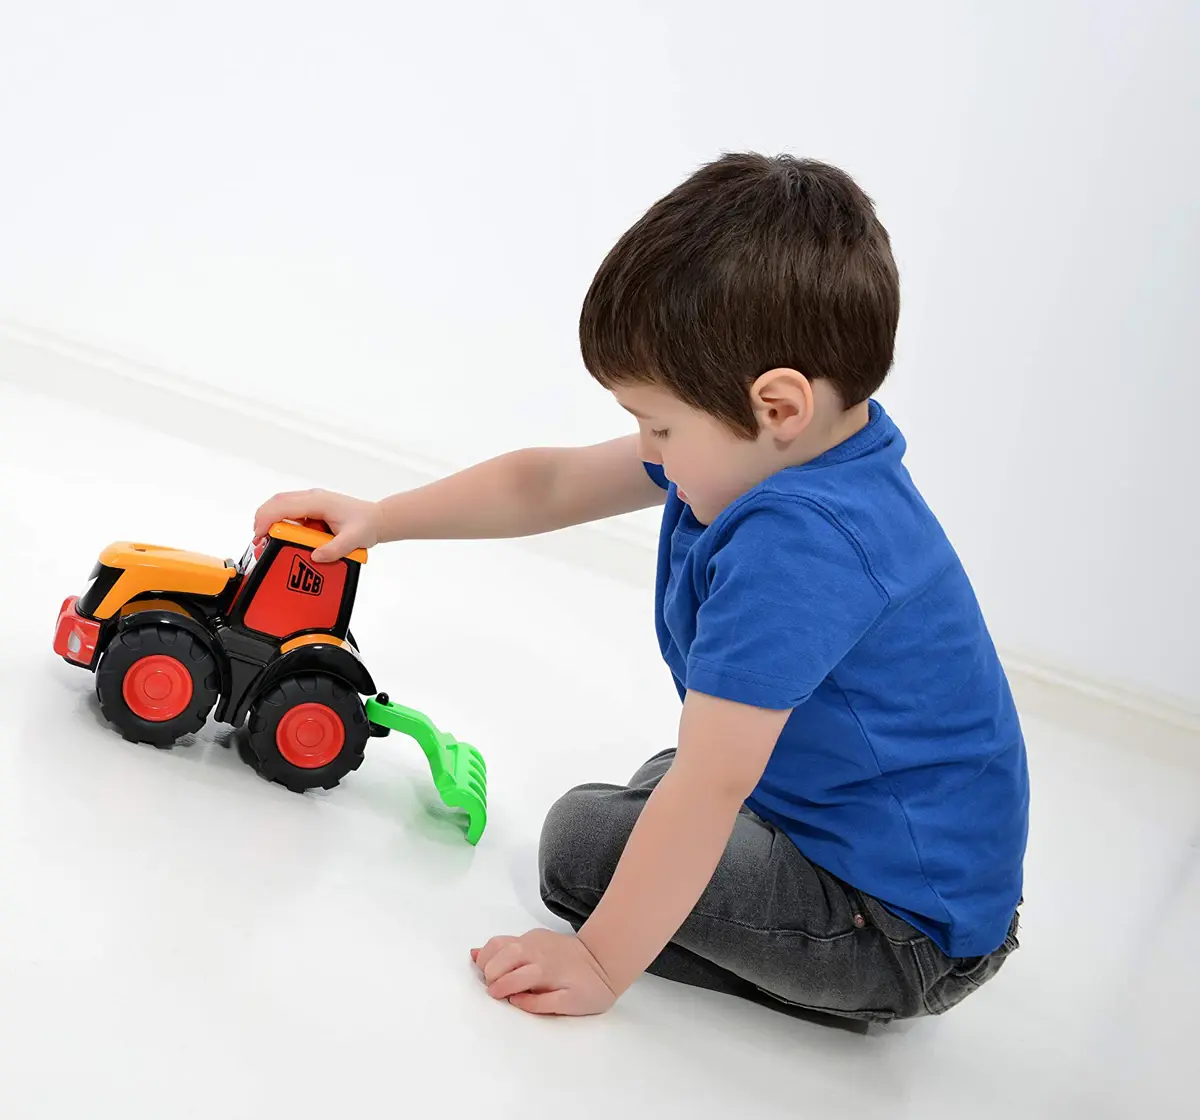 JCB My First Big wheeler Freddie Fastrac Construction Toys for kids 12M+, Multicolour